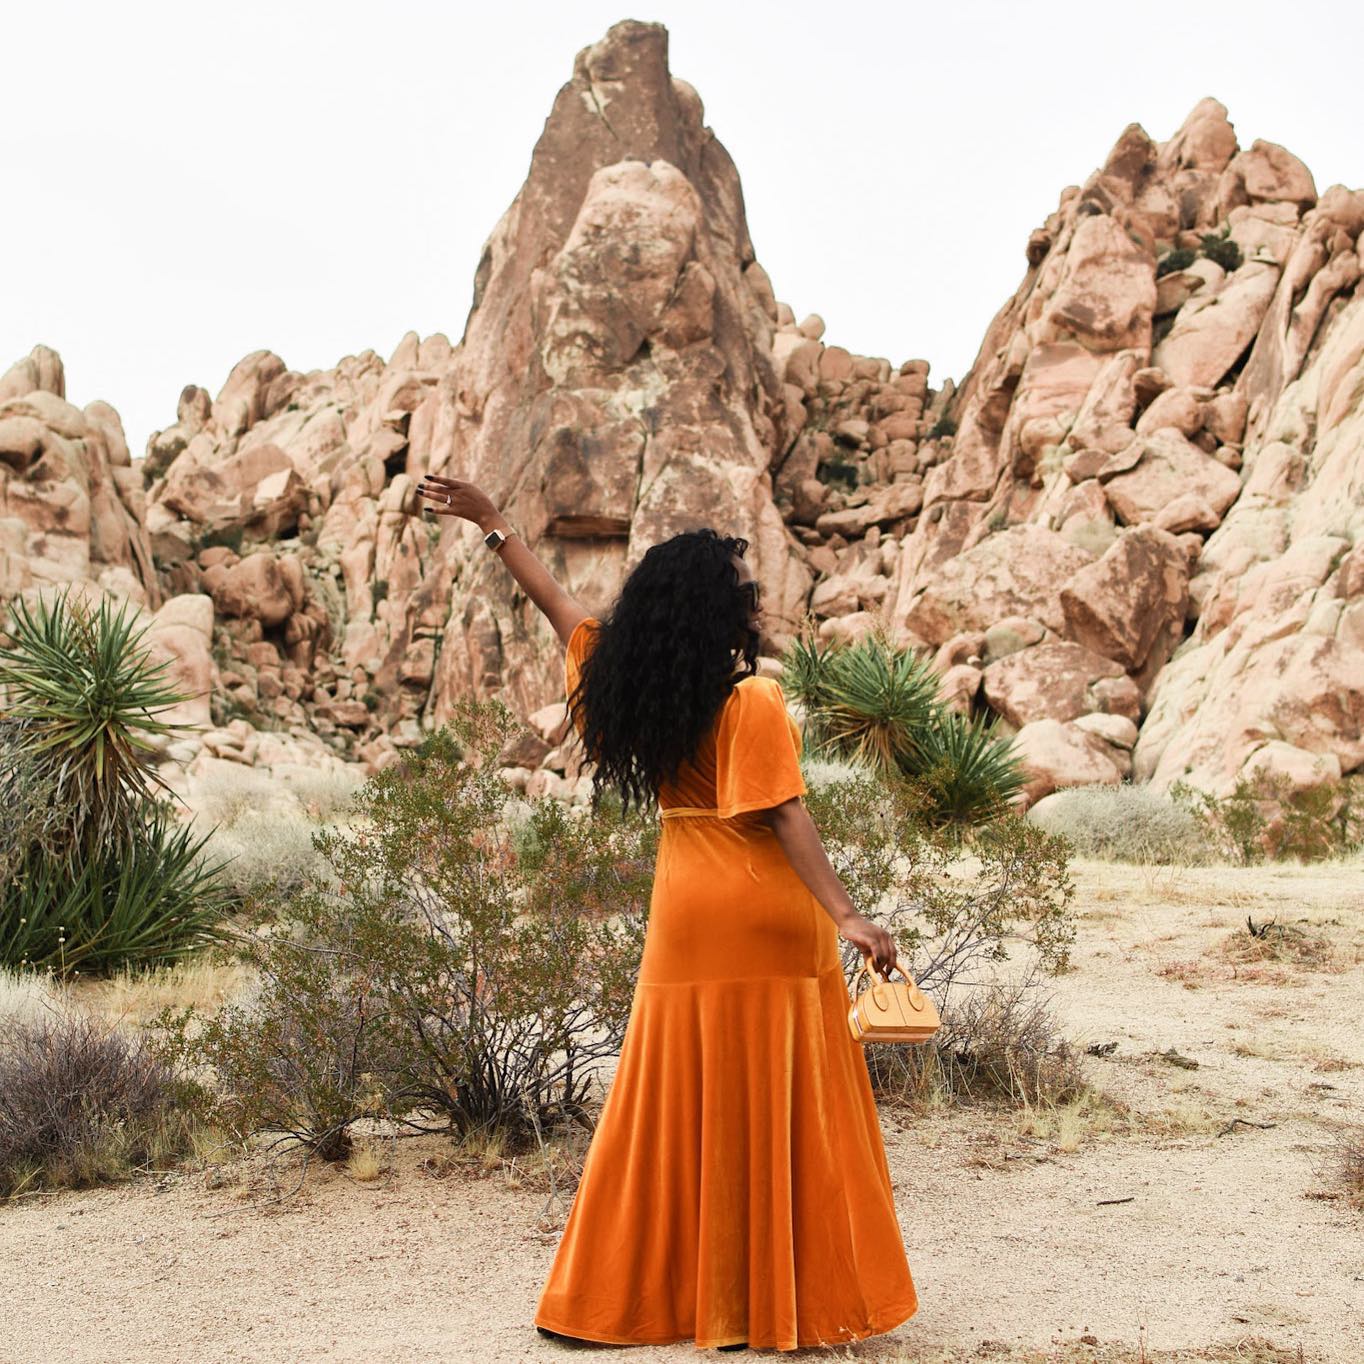 Joshua Tree, but make it fashion. 🧡⁣
⁣
One of my intentions for 2020 is to get out and connect with nature more, so a peaceful trip to Joshua Tree felt appropriate. 🌵 What other national parks should hit this year?!